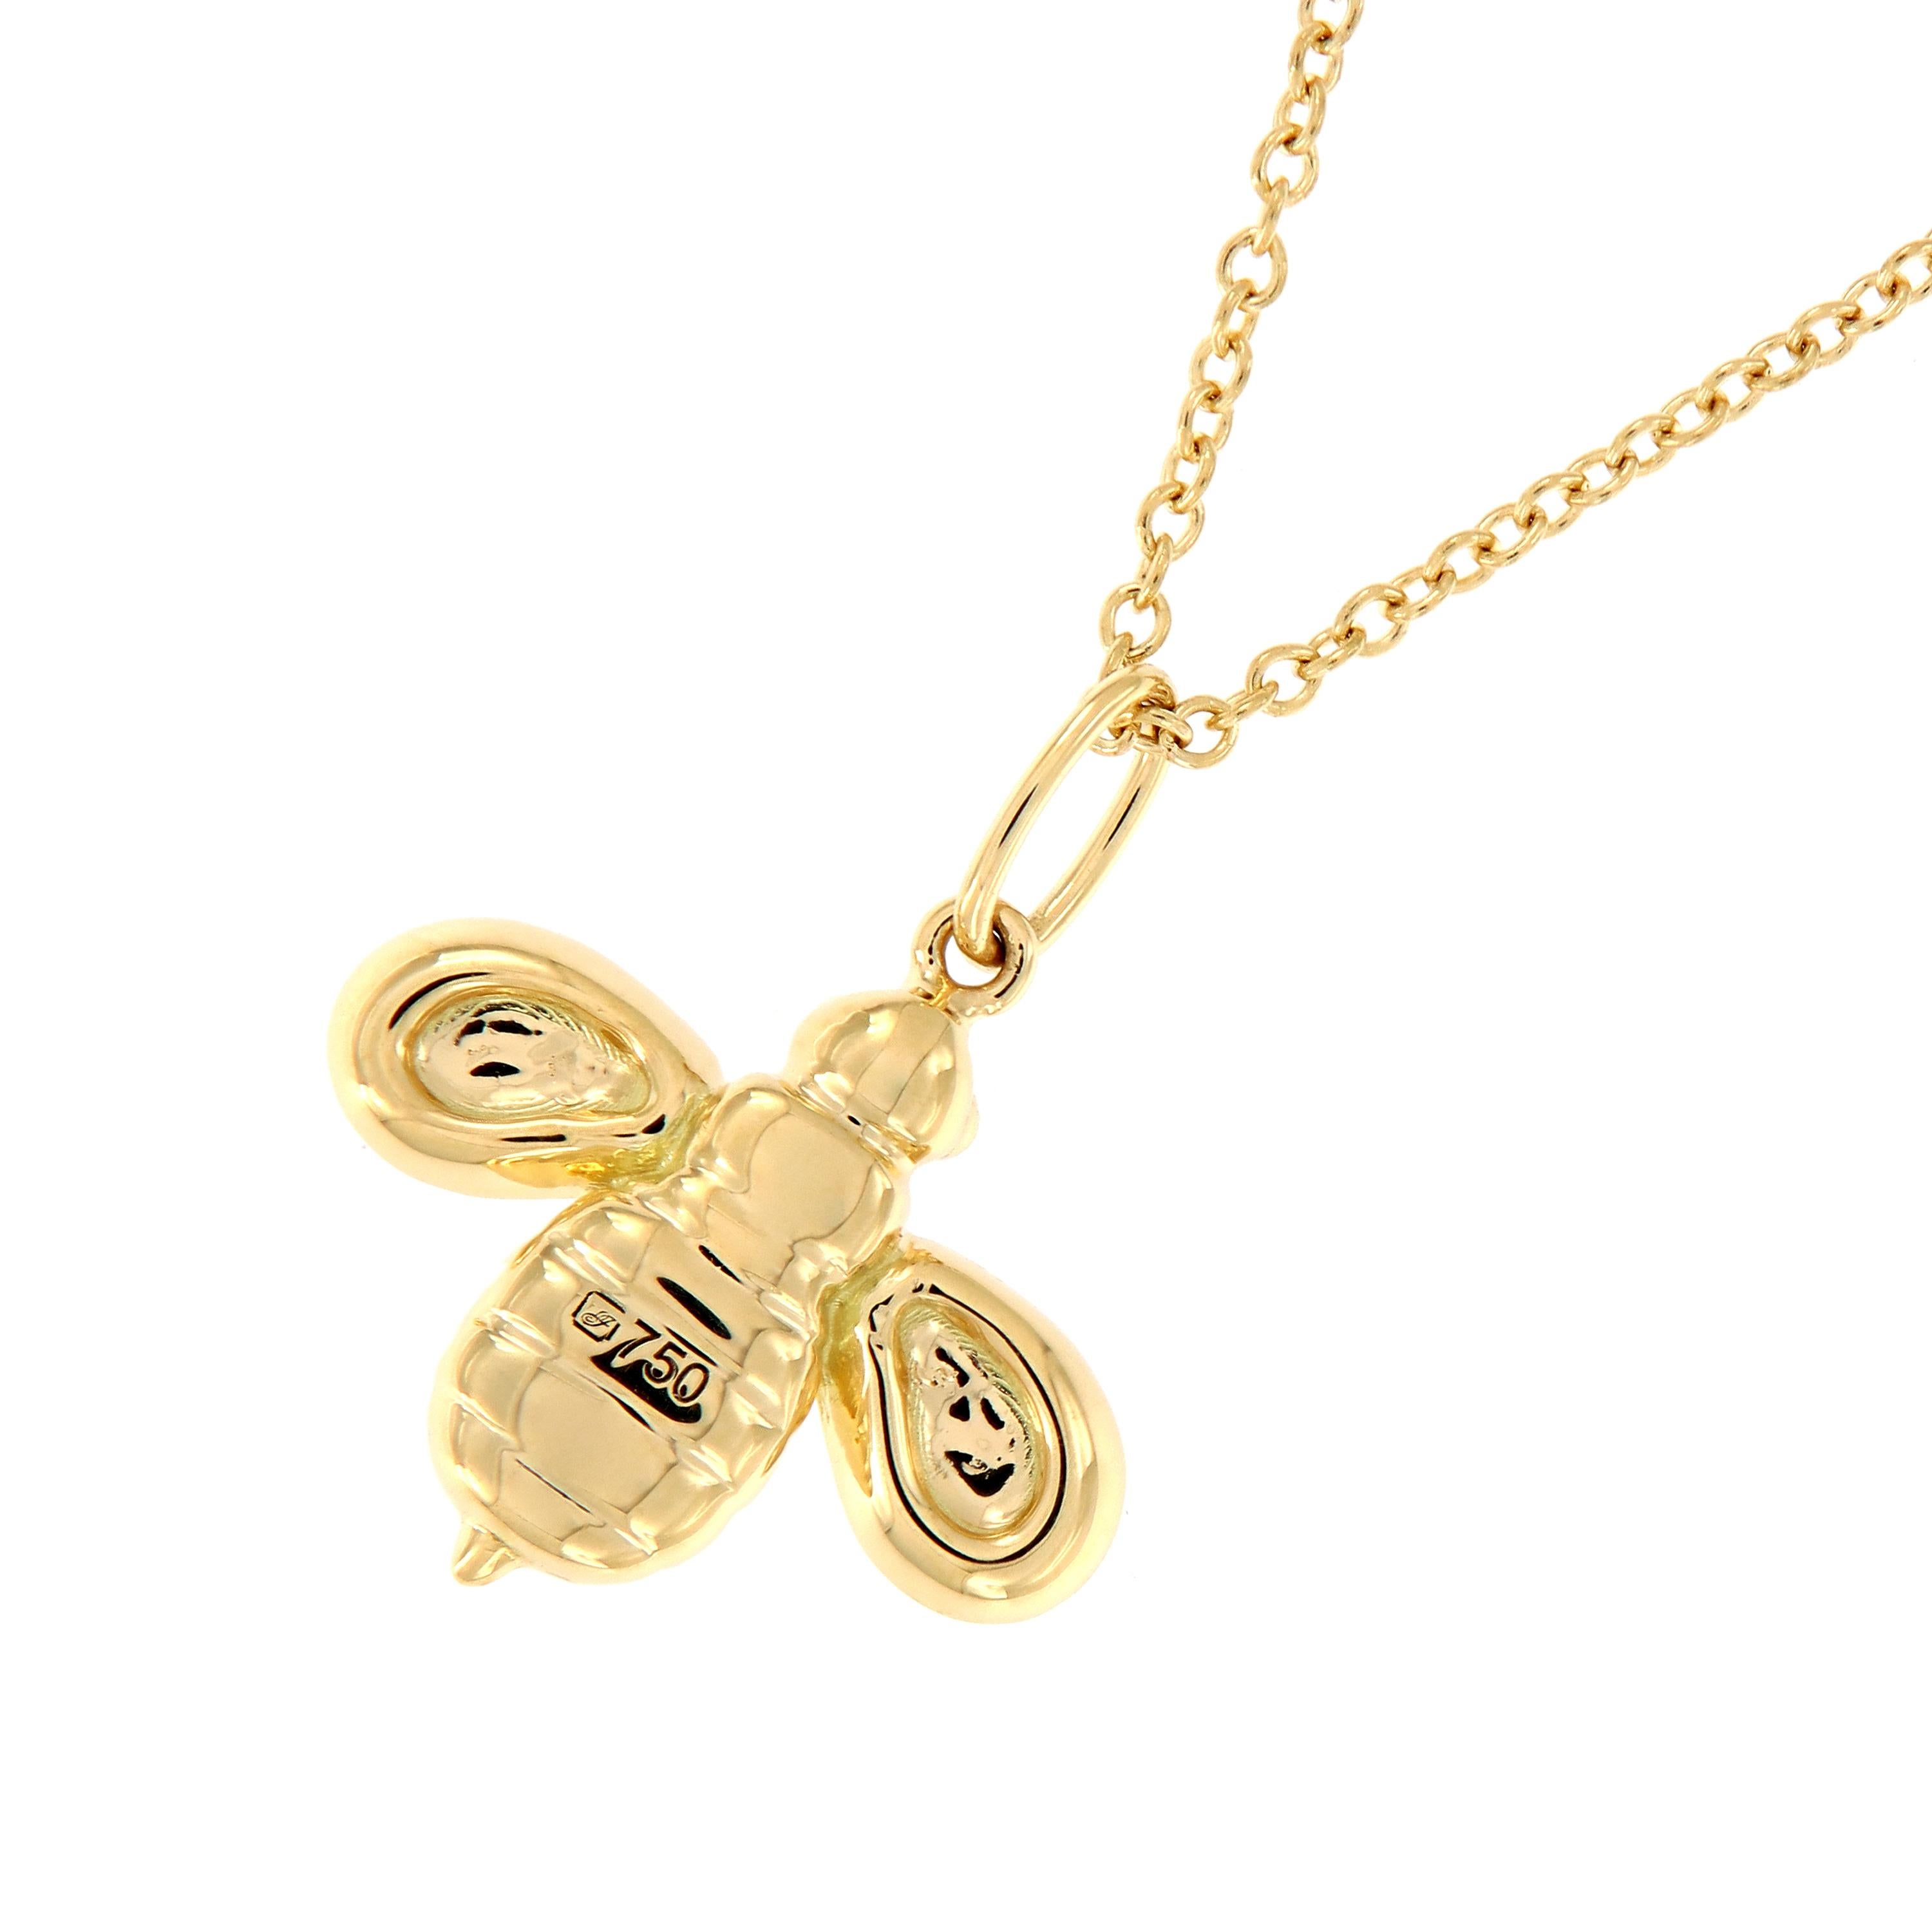 This charming 18k yellow gold worker bee pendant features 20 round brilliant cut diamonds in the wings and diamond eyes. Necklace is from the Honeybee “B” Collection by Gumuchian. Chain is 16 inches.

Diamonds 0.09 cttw, SI1, HI